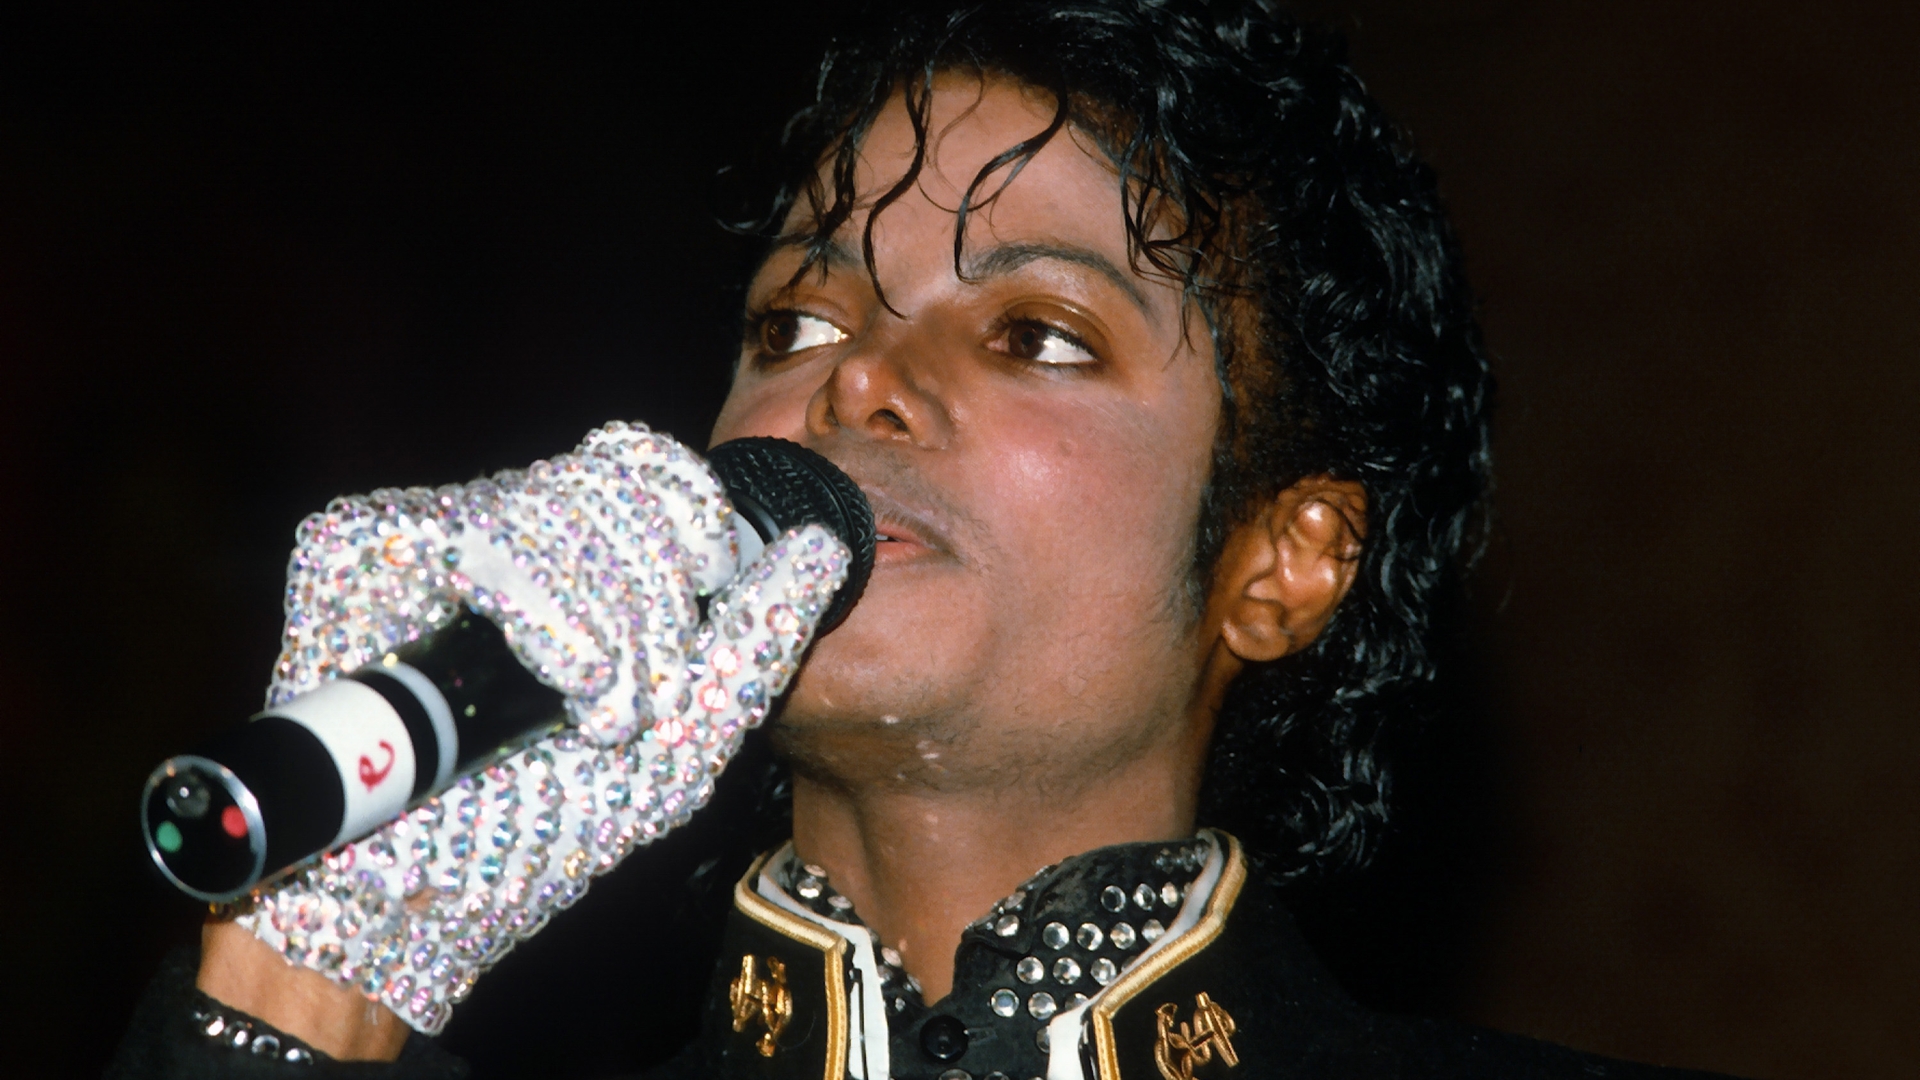 Why did Michael Jackson only wear one glove?